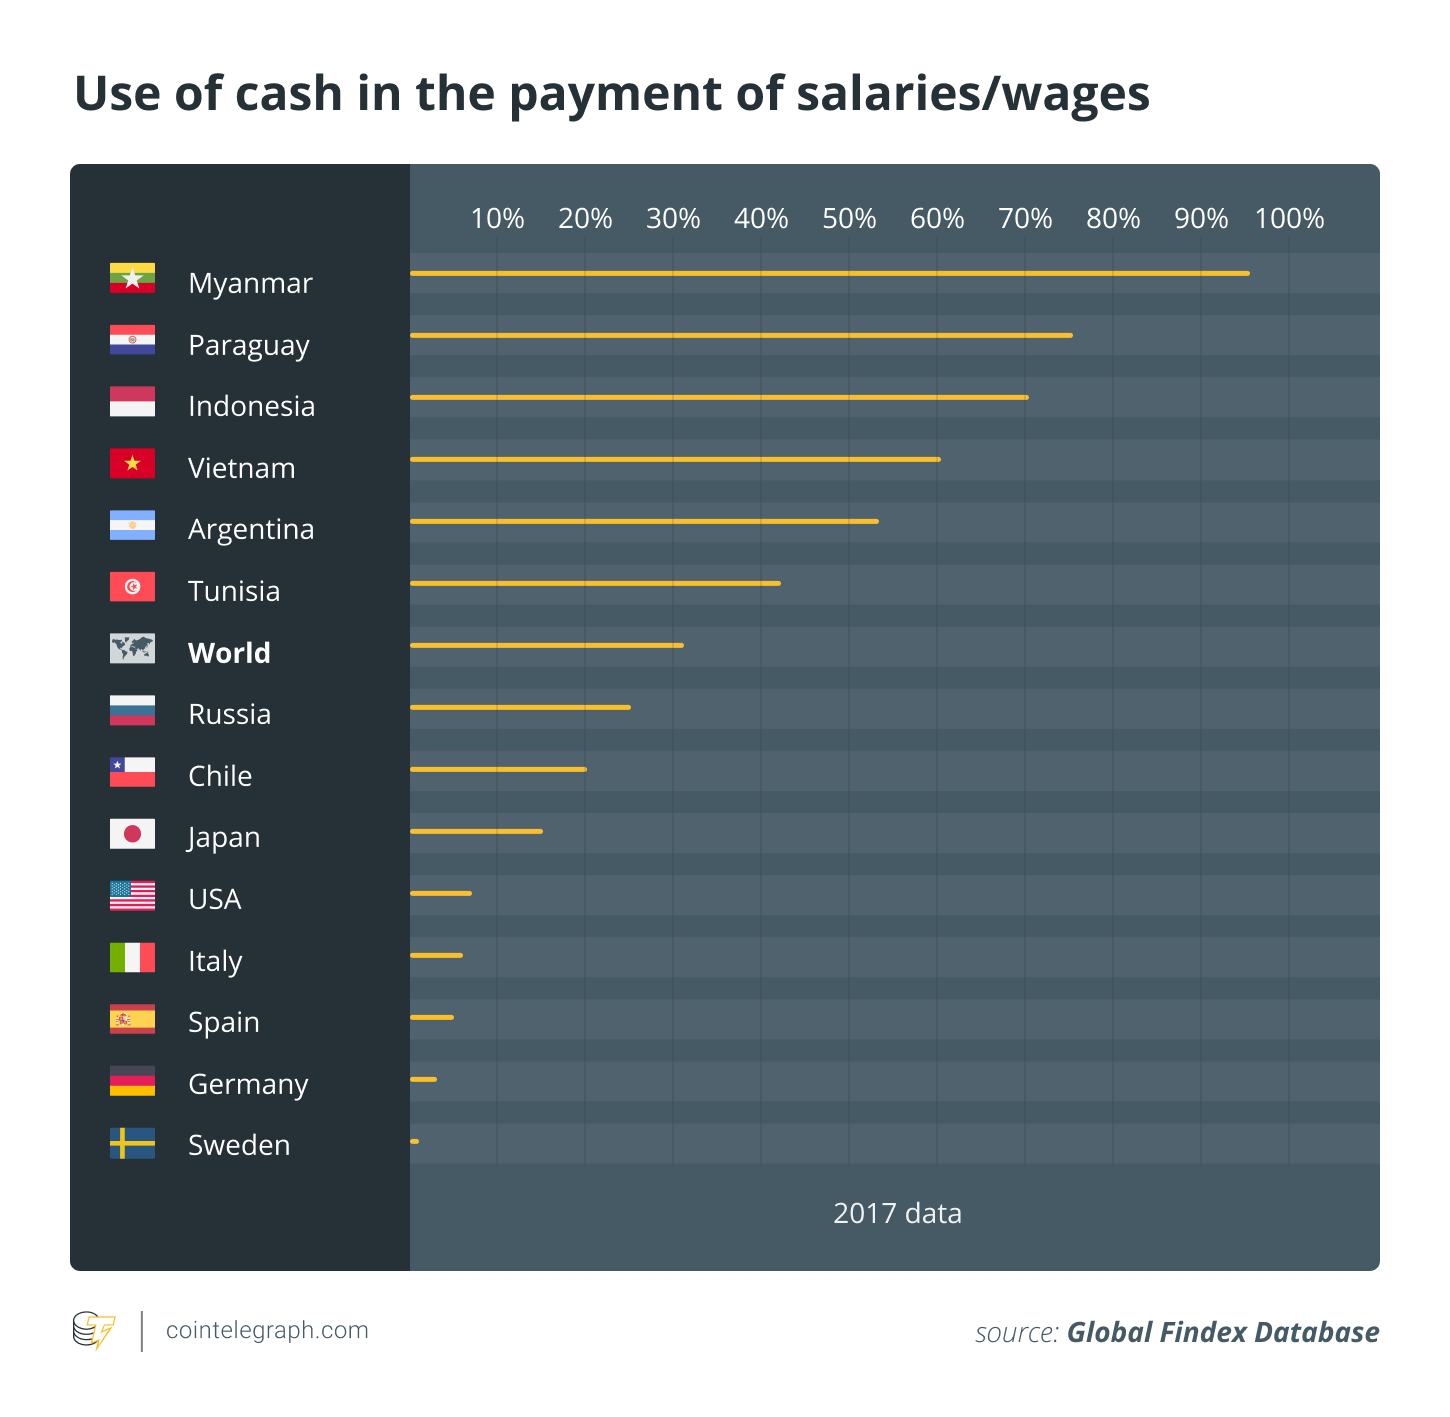 Use of cash in the payment of salaries/wages